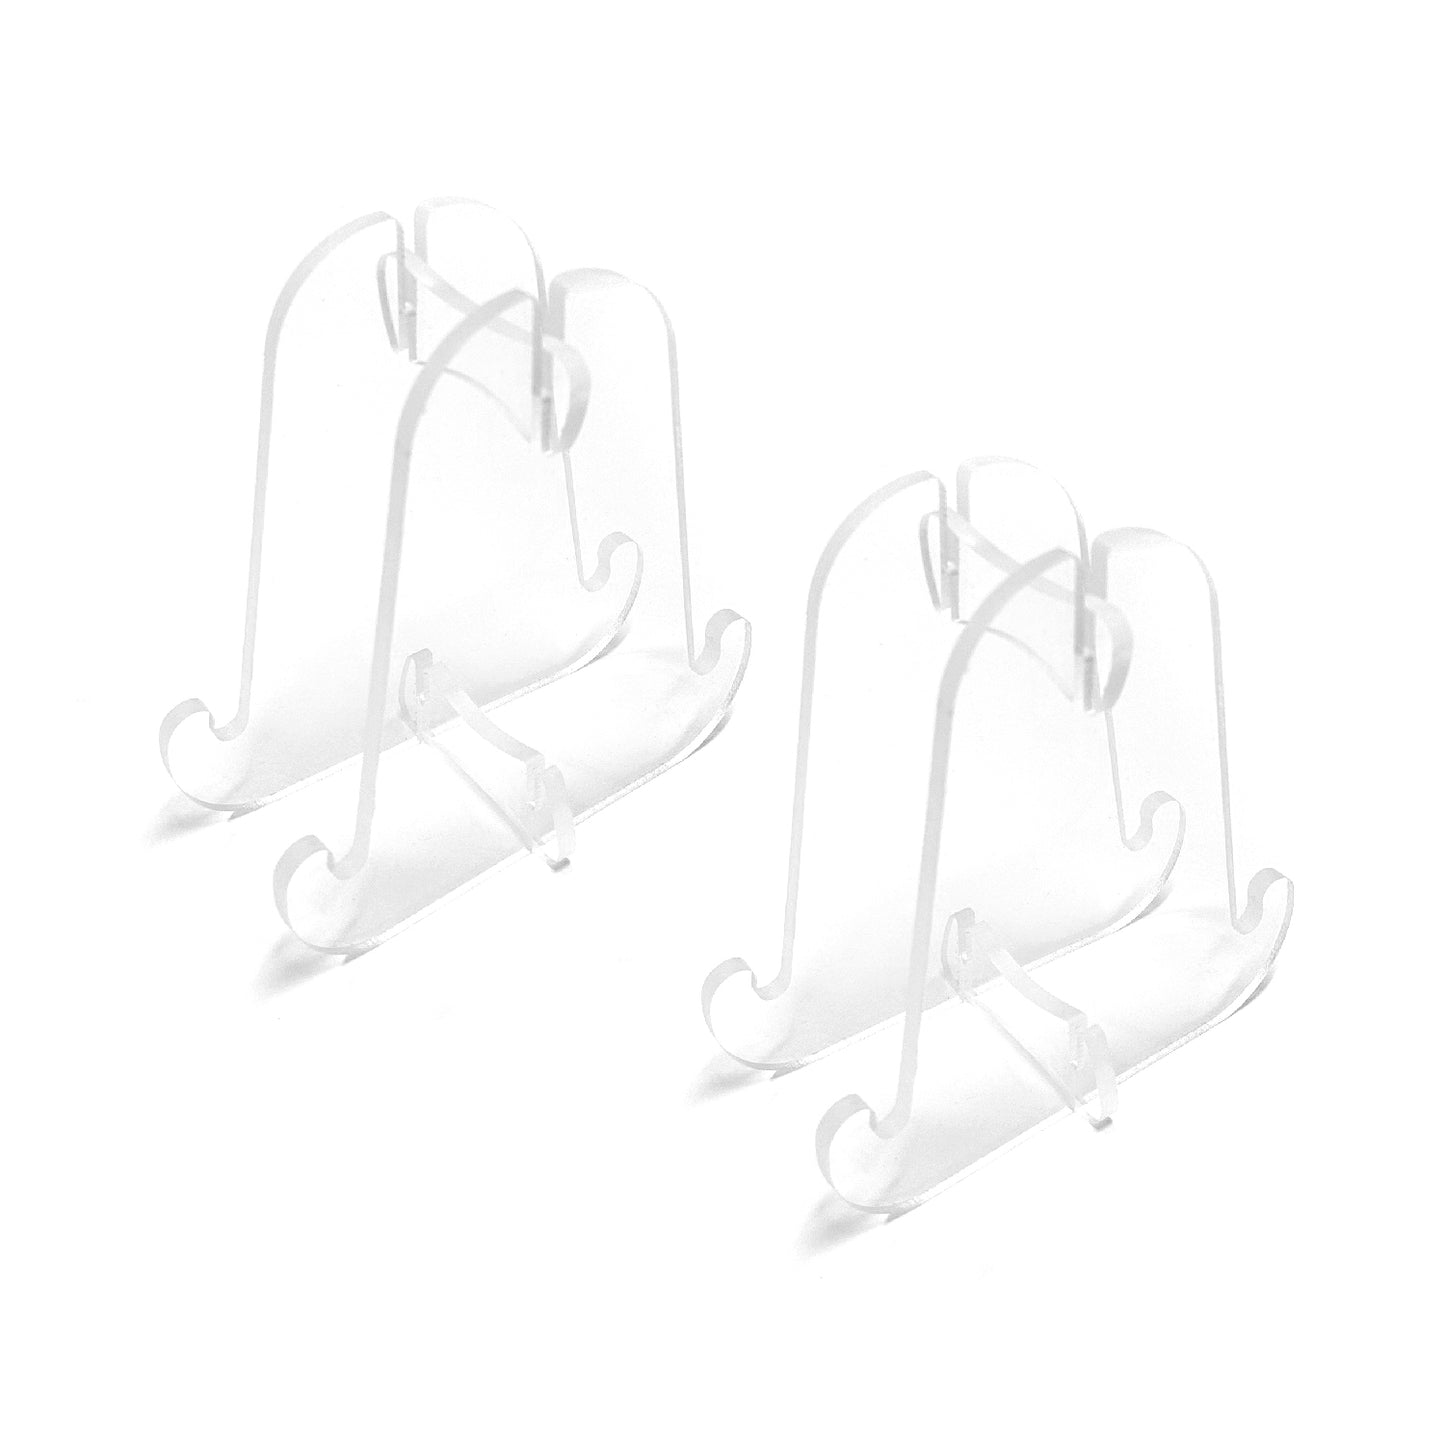 Clear Acrylic Stand Assembly Type - SB4SS x 2 set